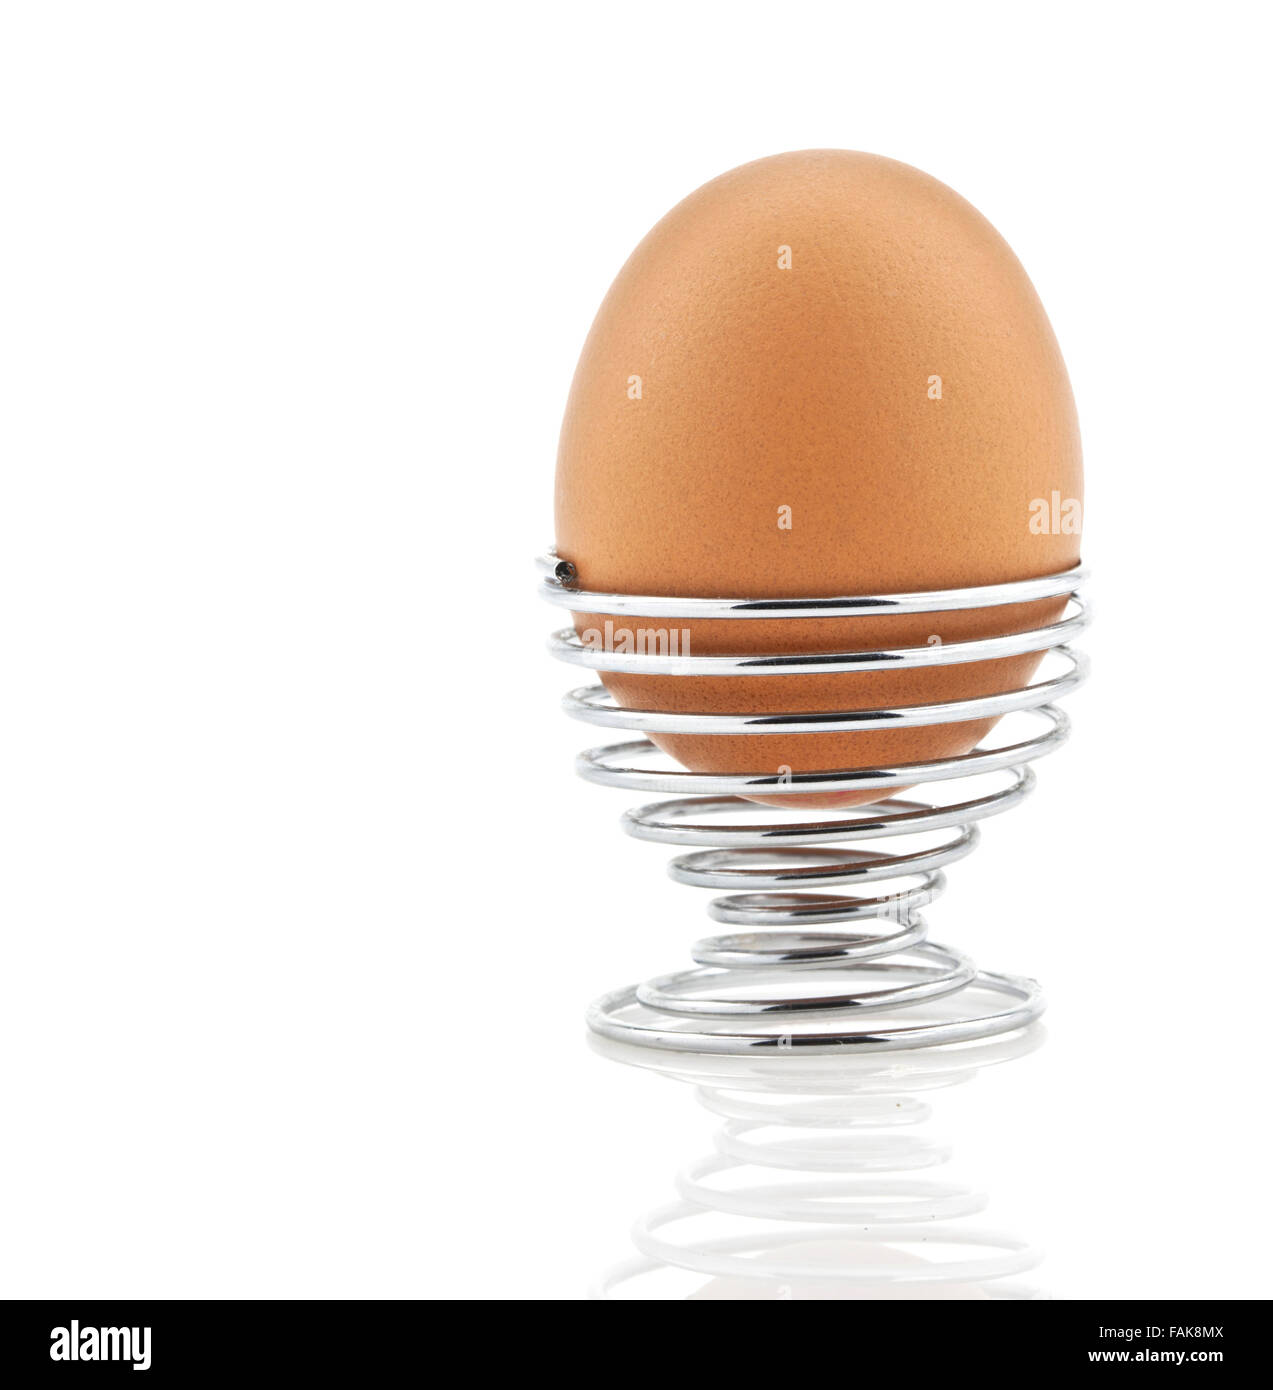 Two boiled eggs in a double egg cup Stock Photo - Alamy